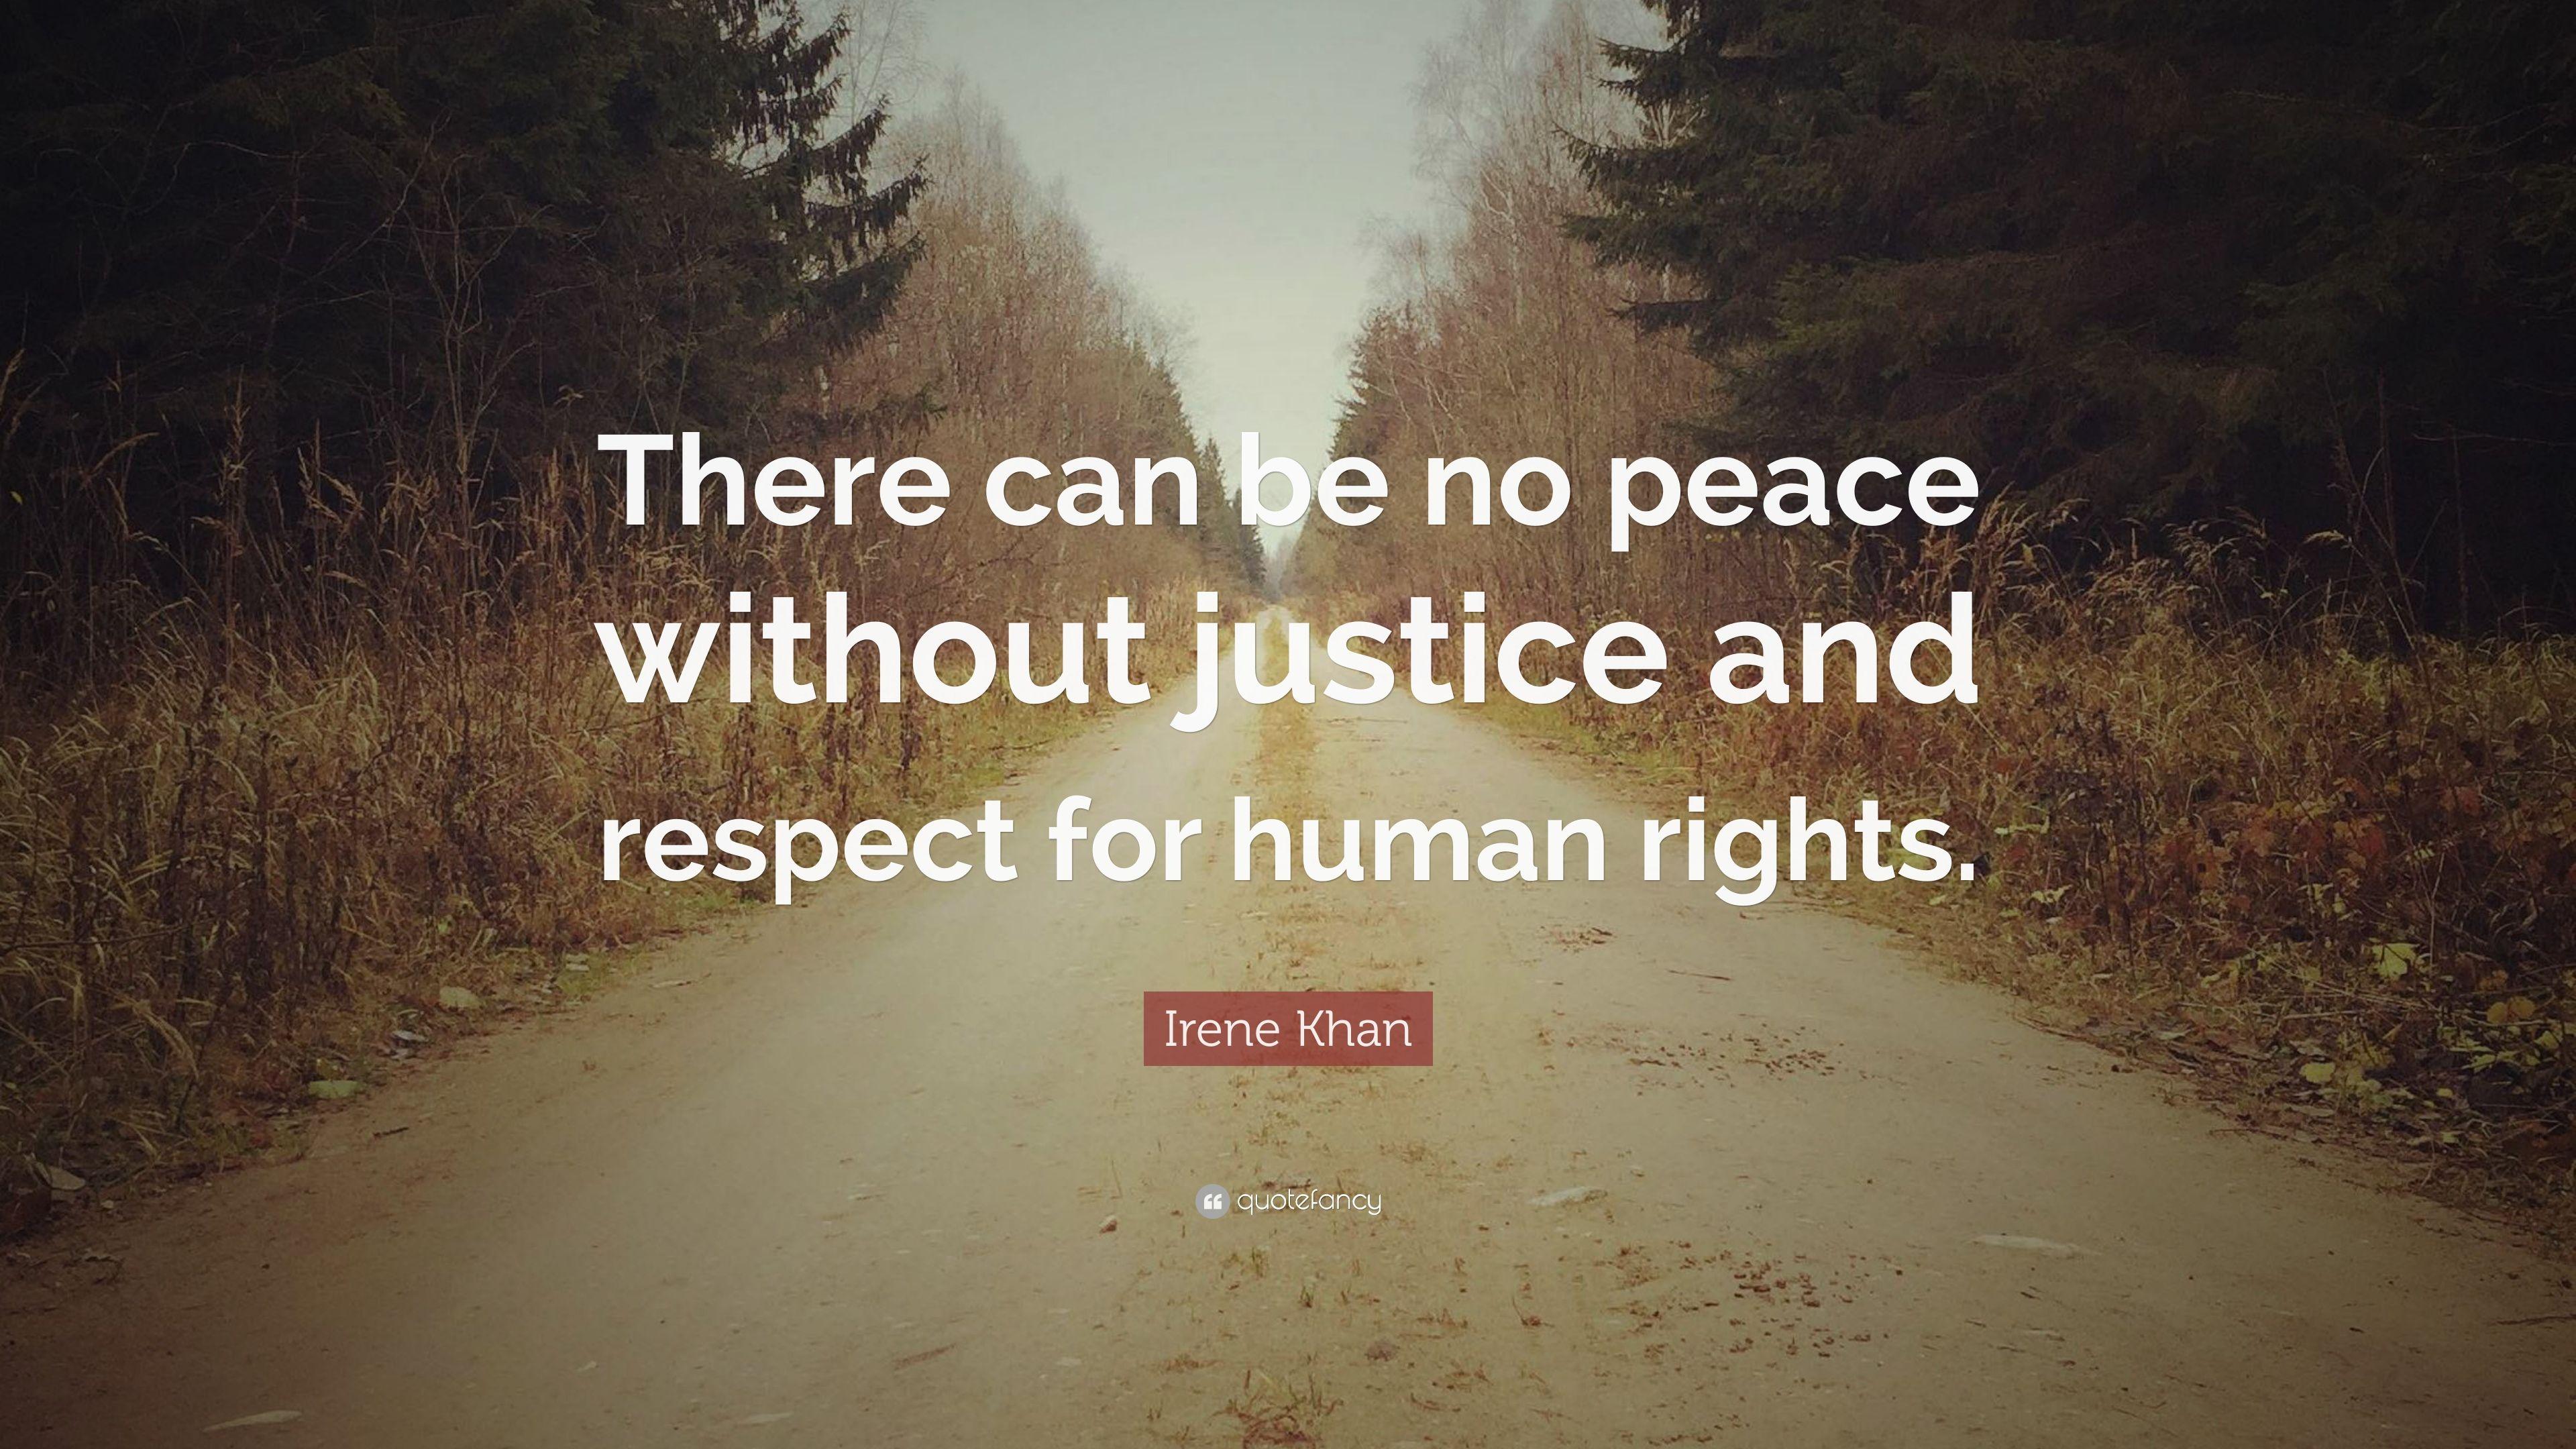 Irene Khan Quote: “There can be no peace without justice